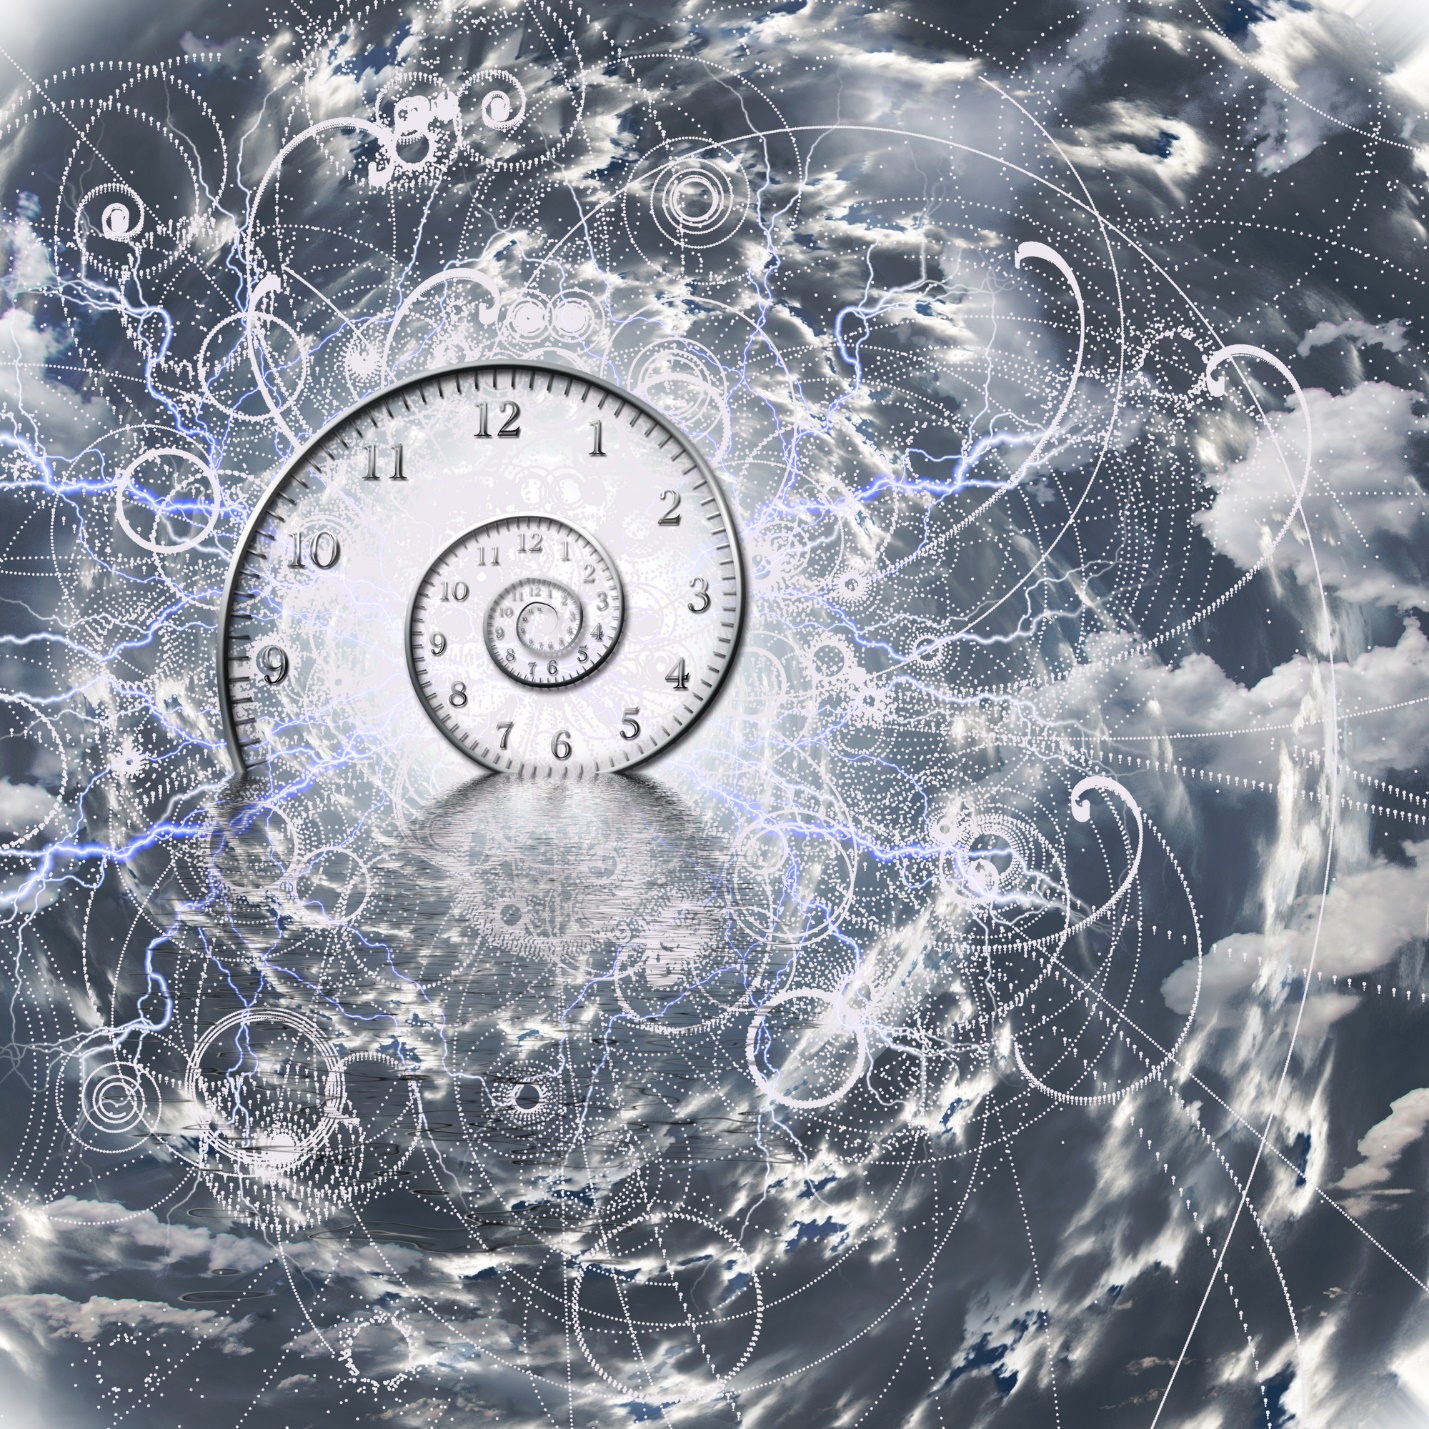 A clock in a spiral

Description automatically generated